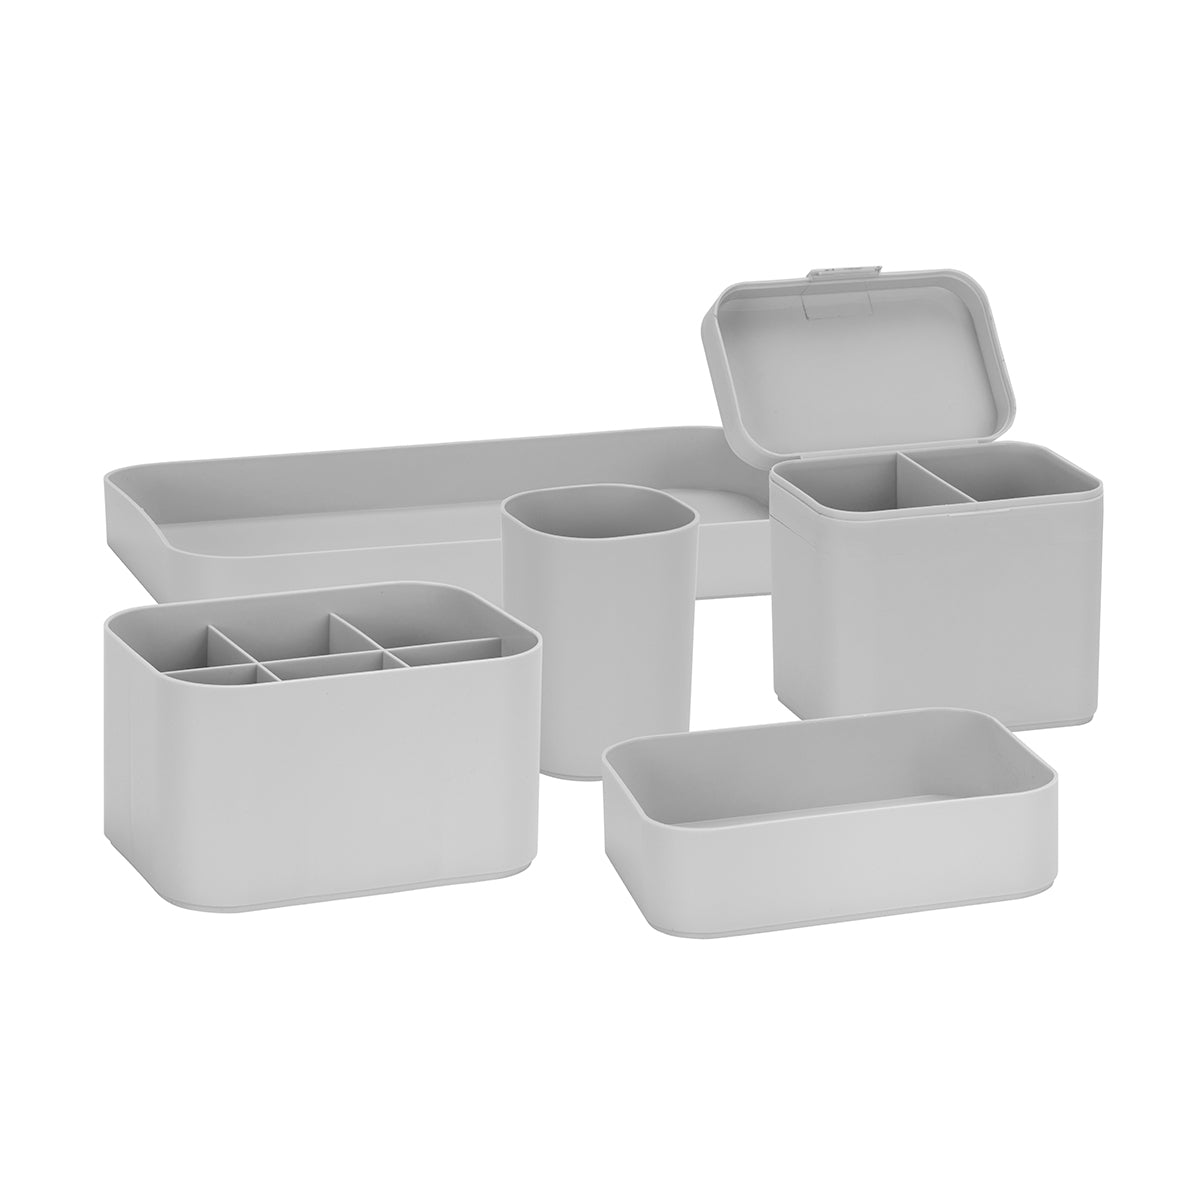 SET OF STORAGE CONTAINERS